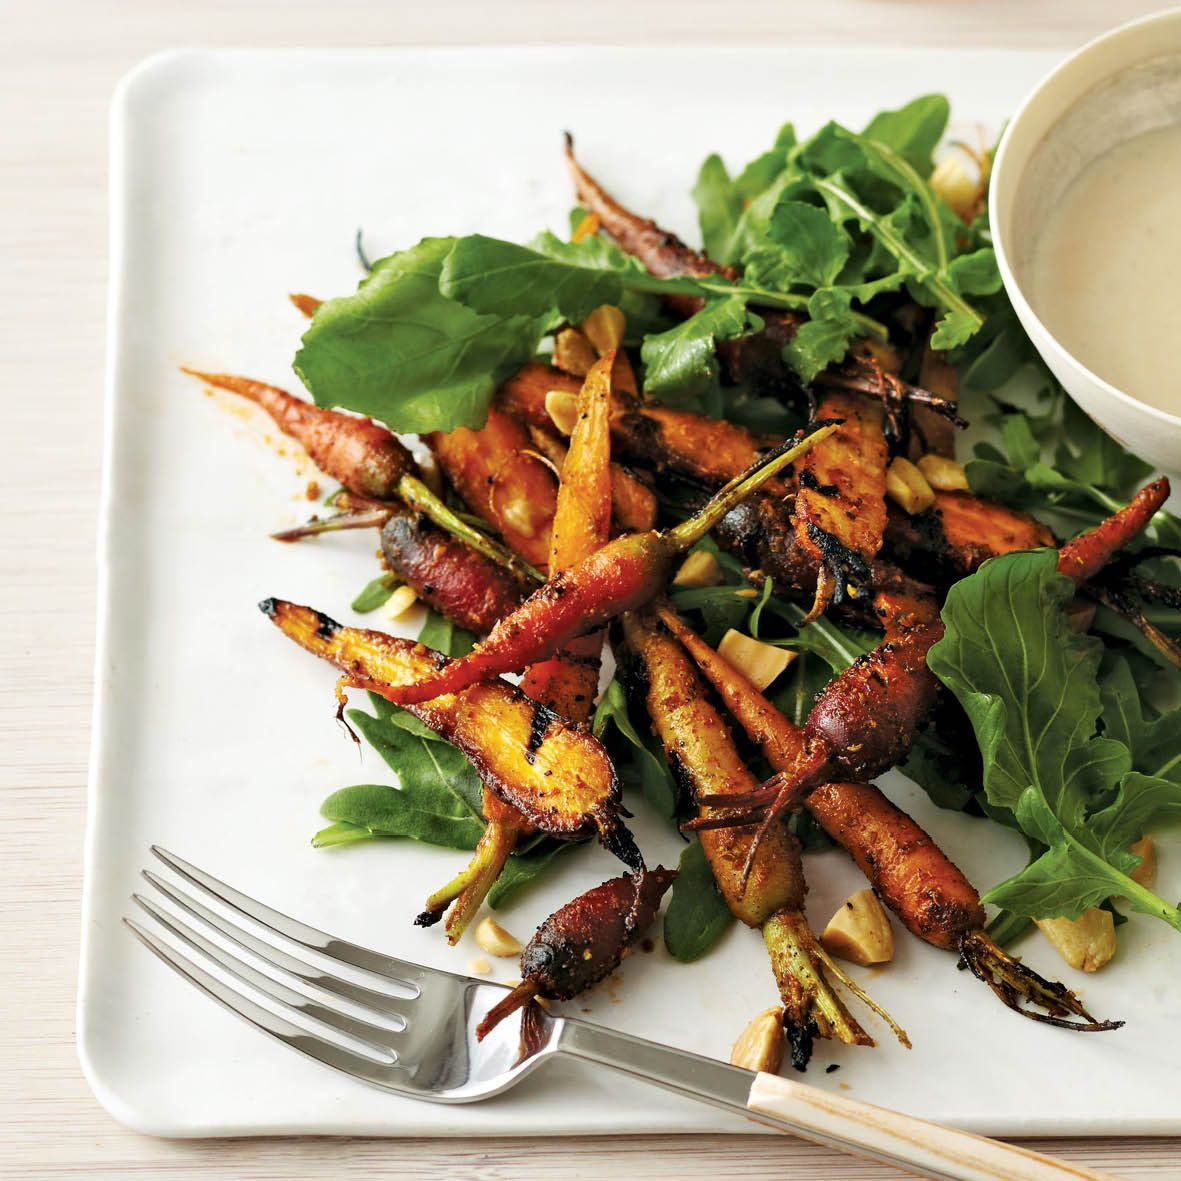 Grilled_Carrot_Salad_with_Brown_Butter_Vinaigrette.jpg